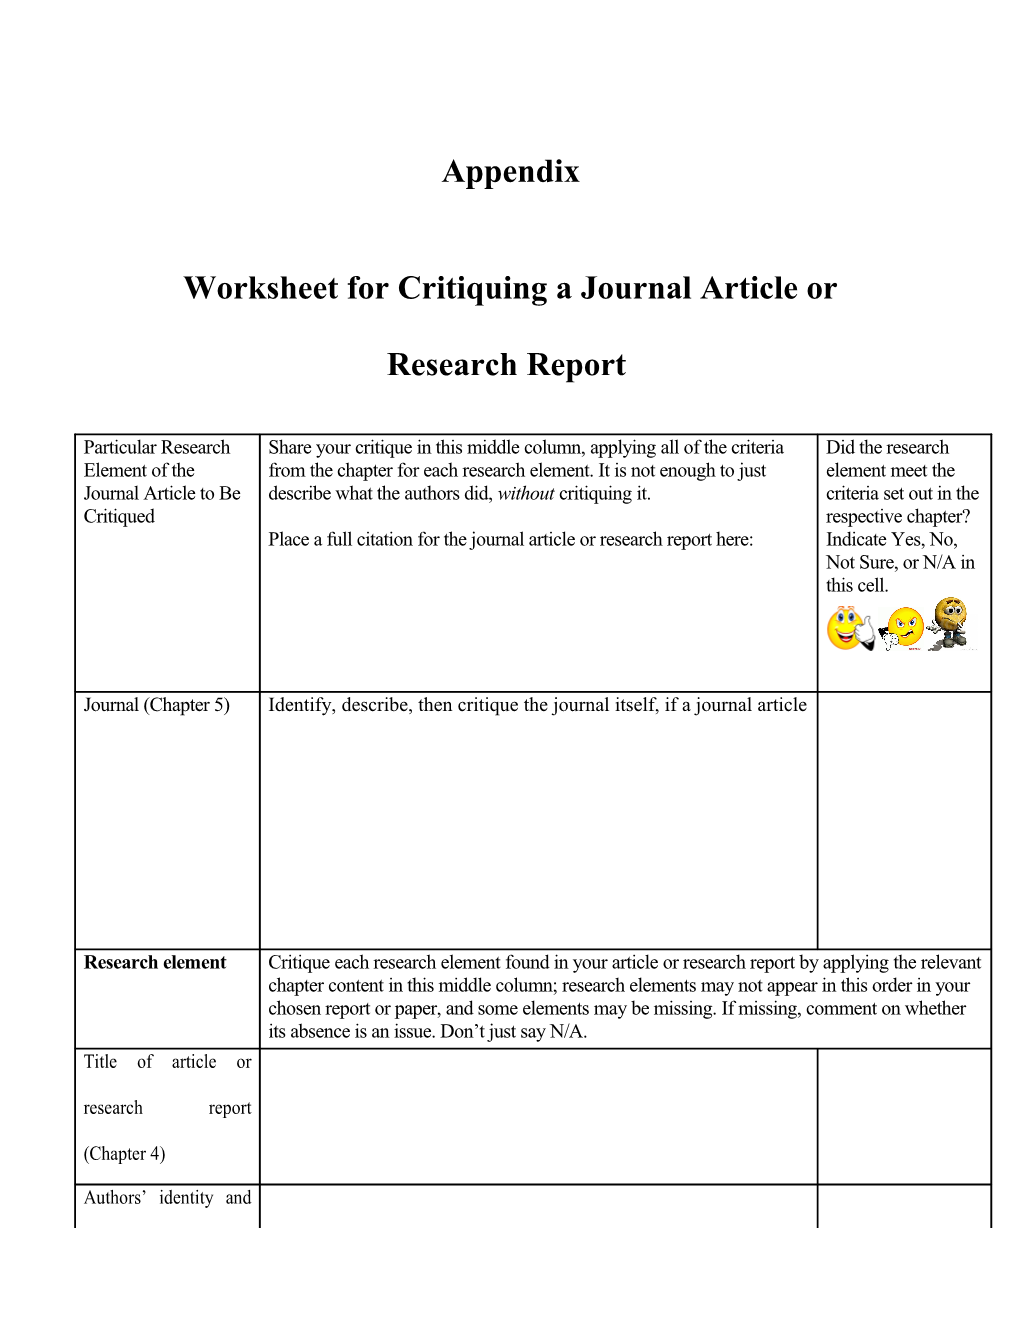 Worksheet for Critiquing a Journal Article Or Research Report